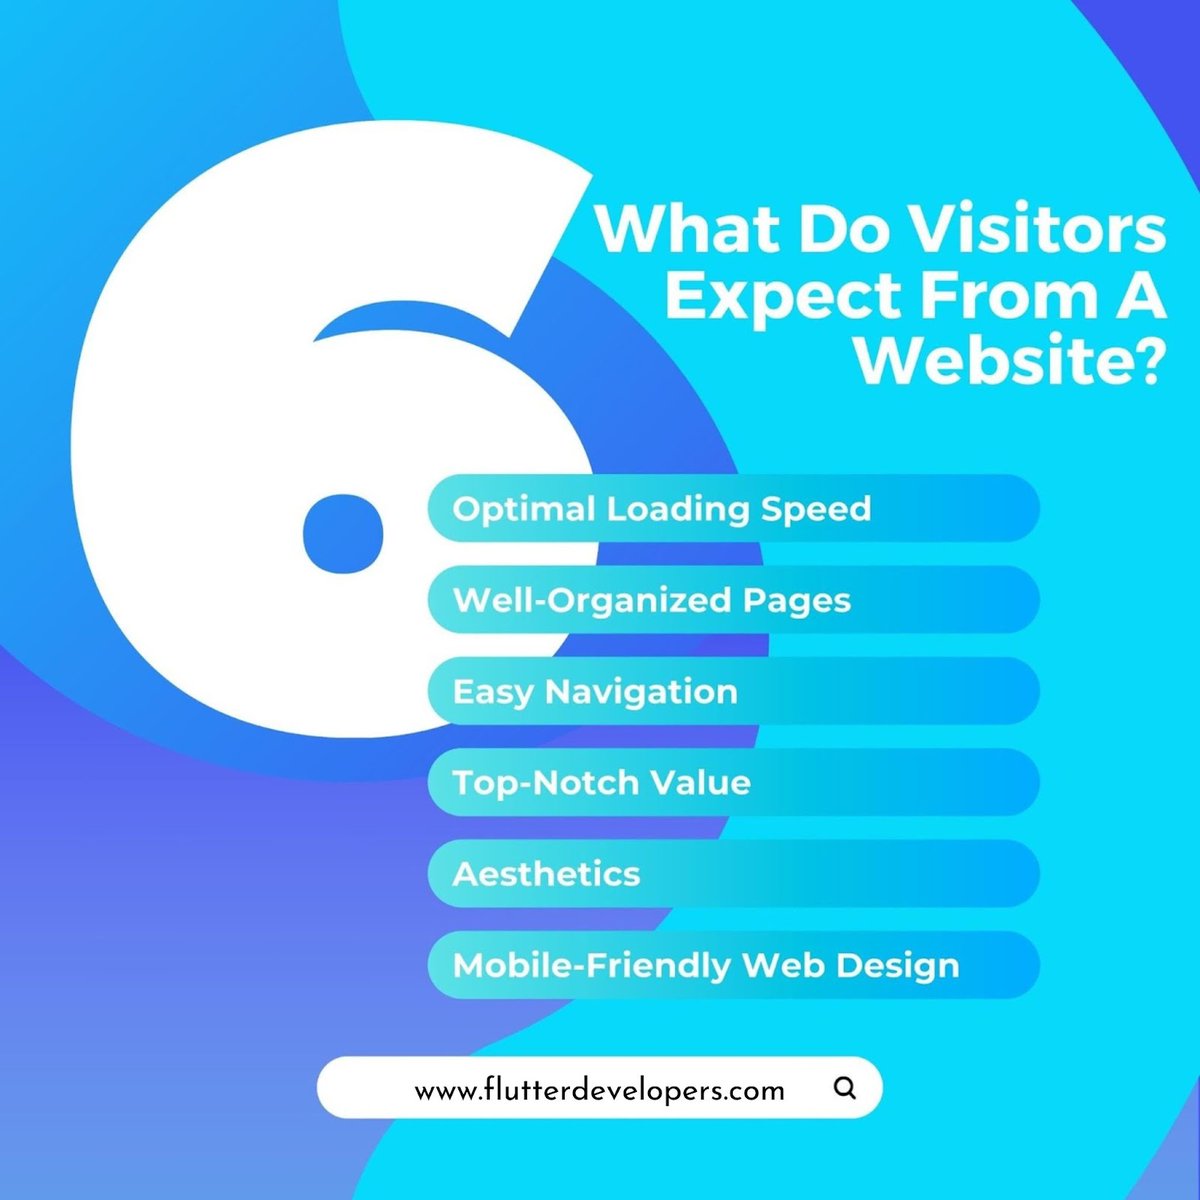 Know what your visitors expect from your website. Understanding and catering to your audience's needs can significantly enhance your online presence and user satisfaction.
---
🌐 flutterdevelopers.com 
.
#Flutter #flutterdevelopers #appdevelopment #digitalmagic #userexperience